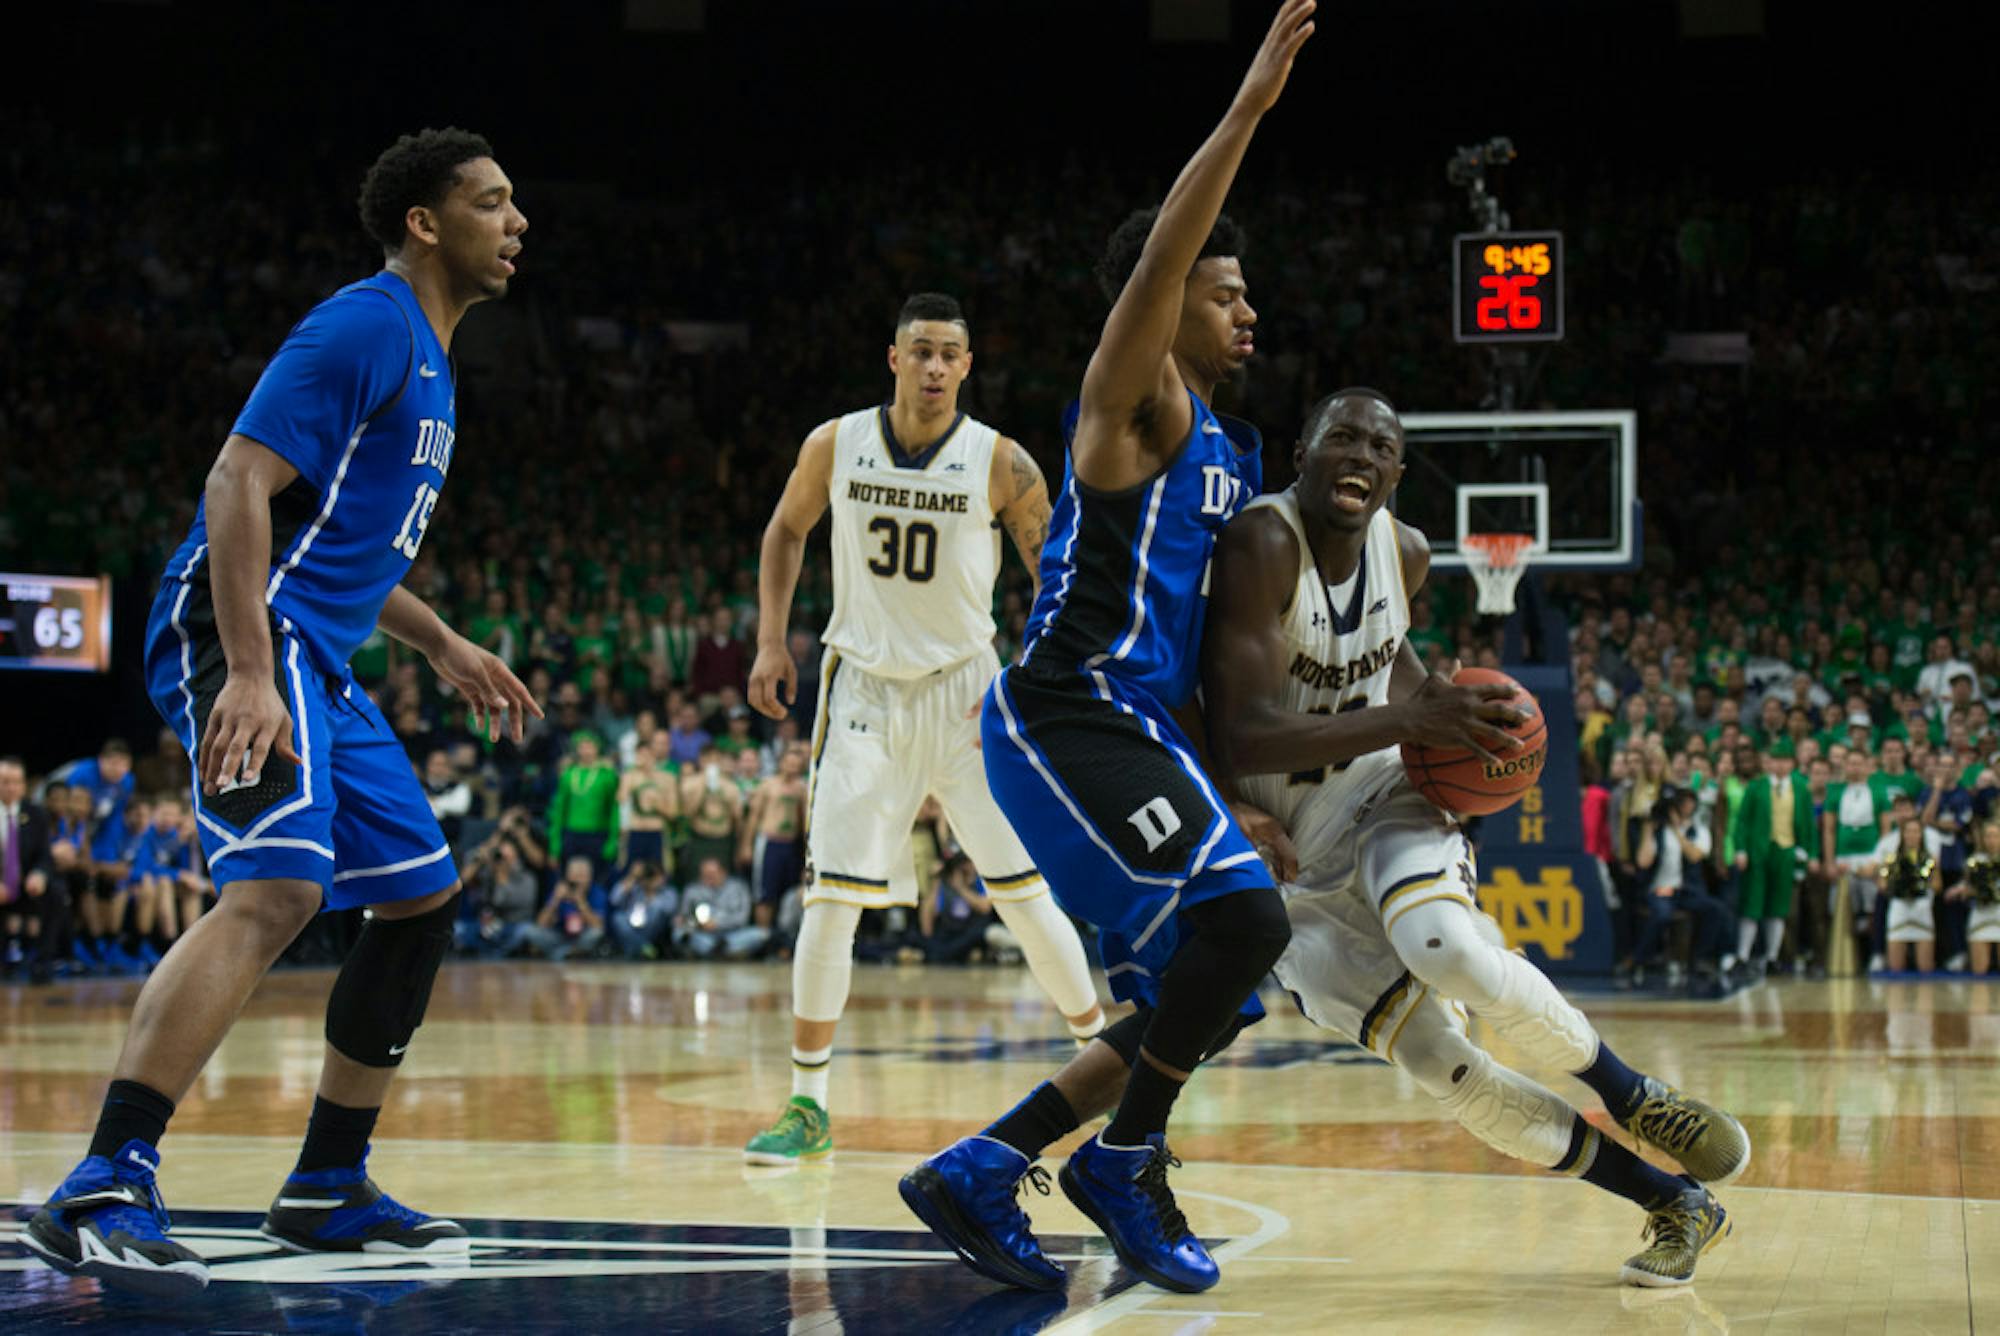 Irish senior guard Jerian Grant takes the ball to the hole during Notre Dame's 77-73 win over Duke on Wednesday at Purcell Pavilion.